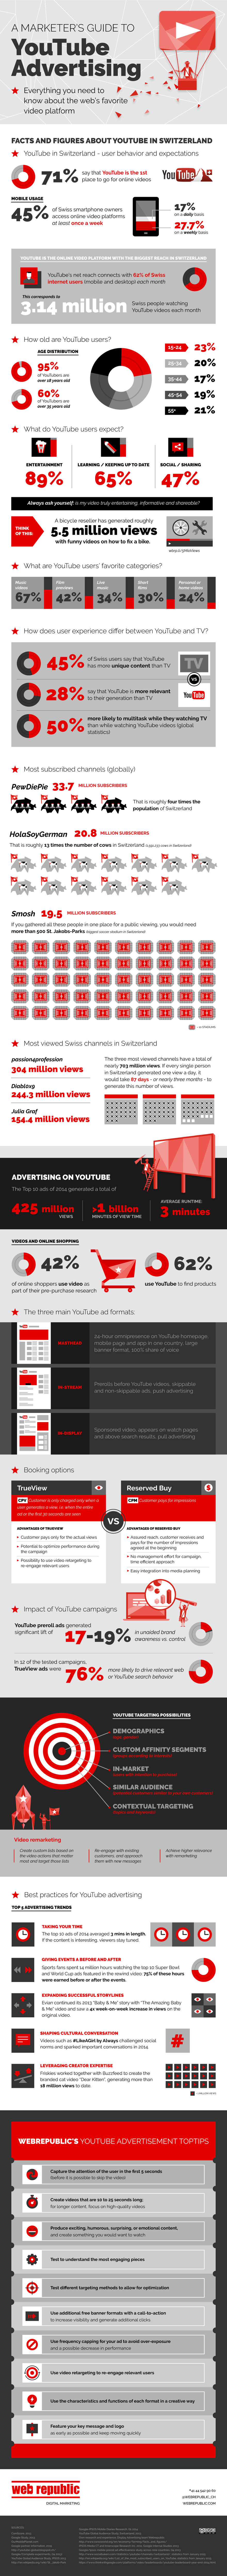 Infographic YouTube Advertising